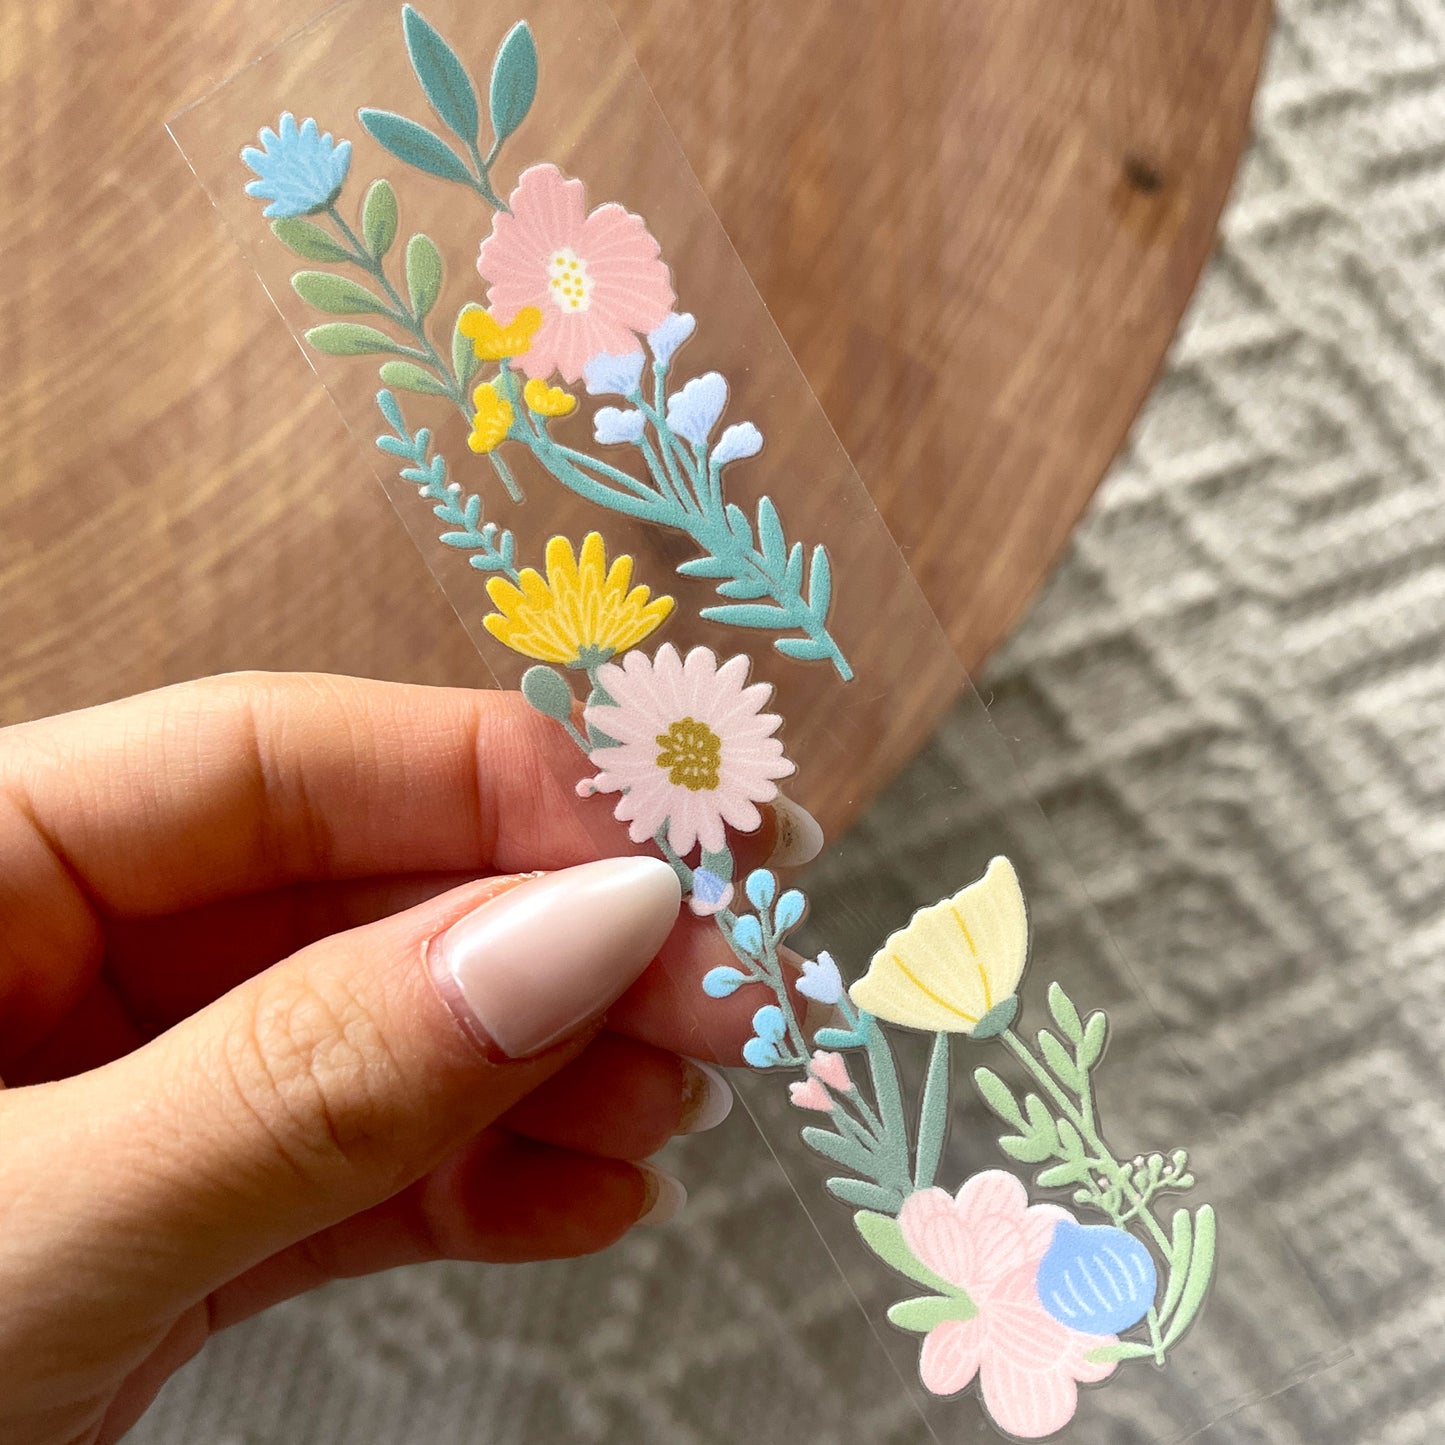 Bookmark UV DTF Decal | Flower: Add Your Own Initial